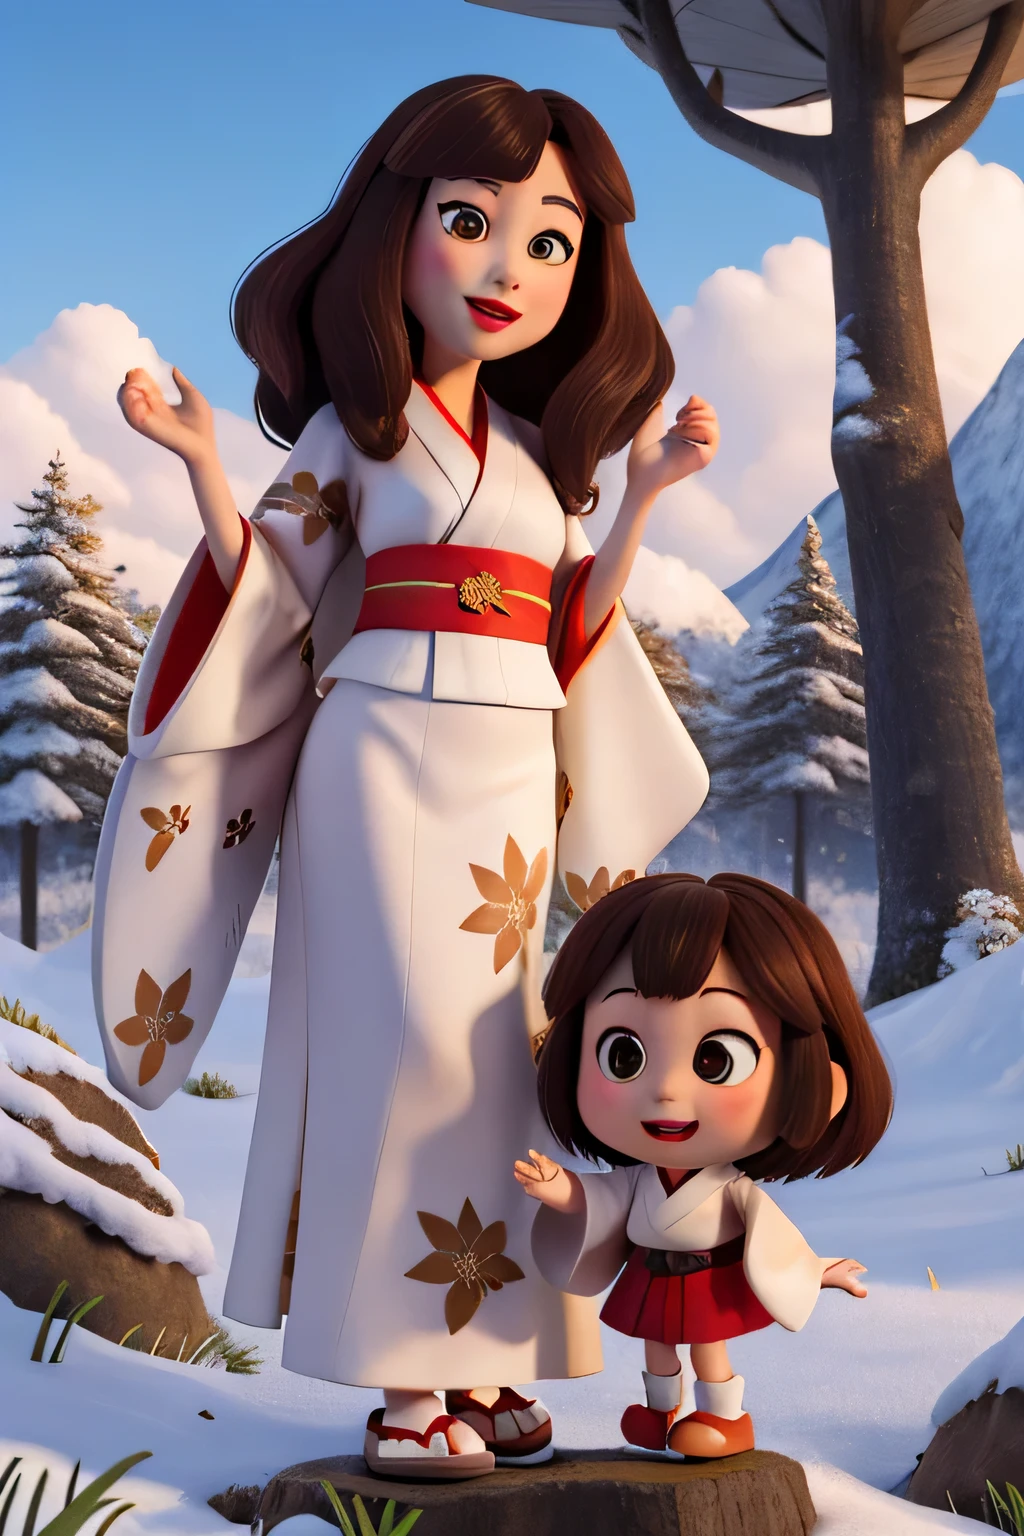 Brown-haired woman, yuki-onna, beautiful white kimono, snow mountains, tree with fallen leaves々, skyporn + Clouds, Red Lipstick, Big lips, Big eyes, merry disney/Pixar-style characters